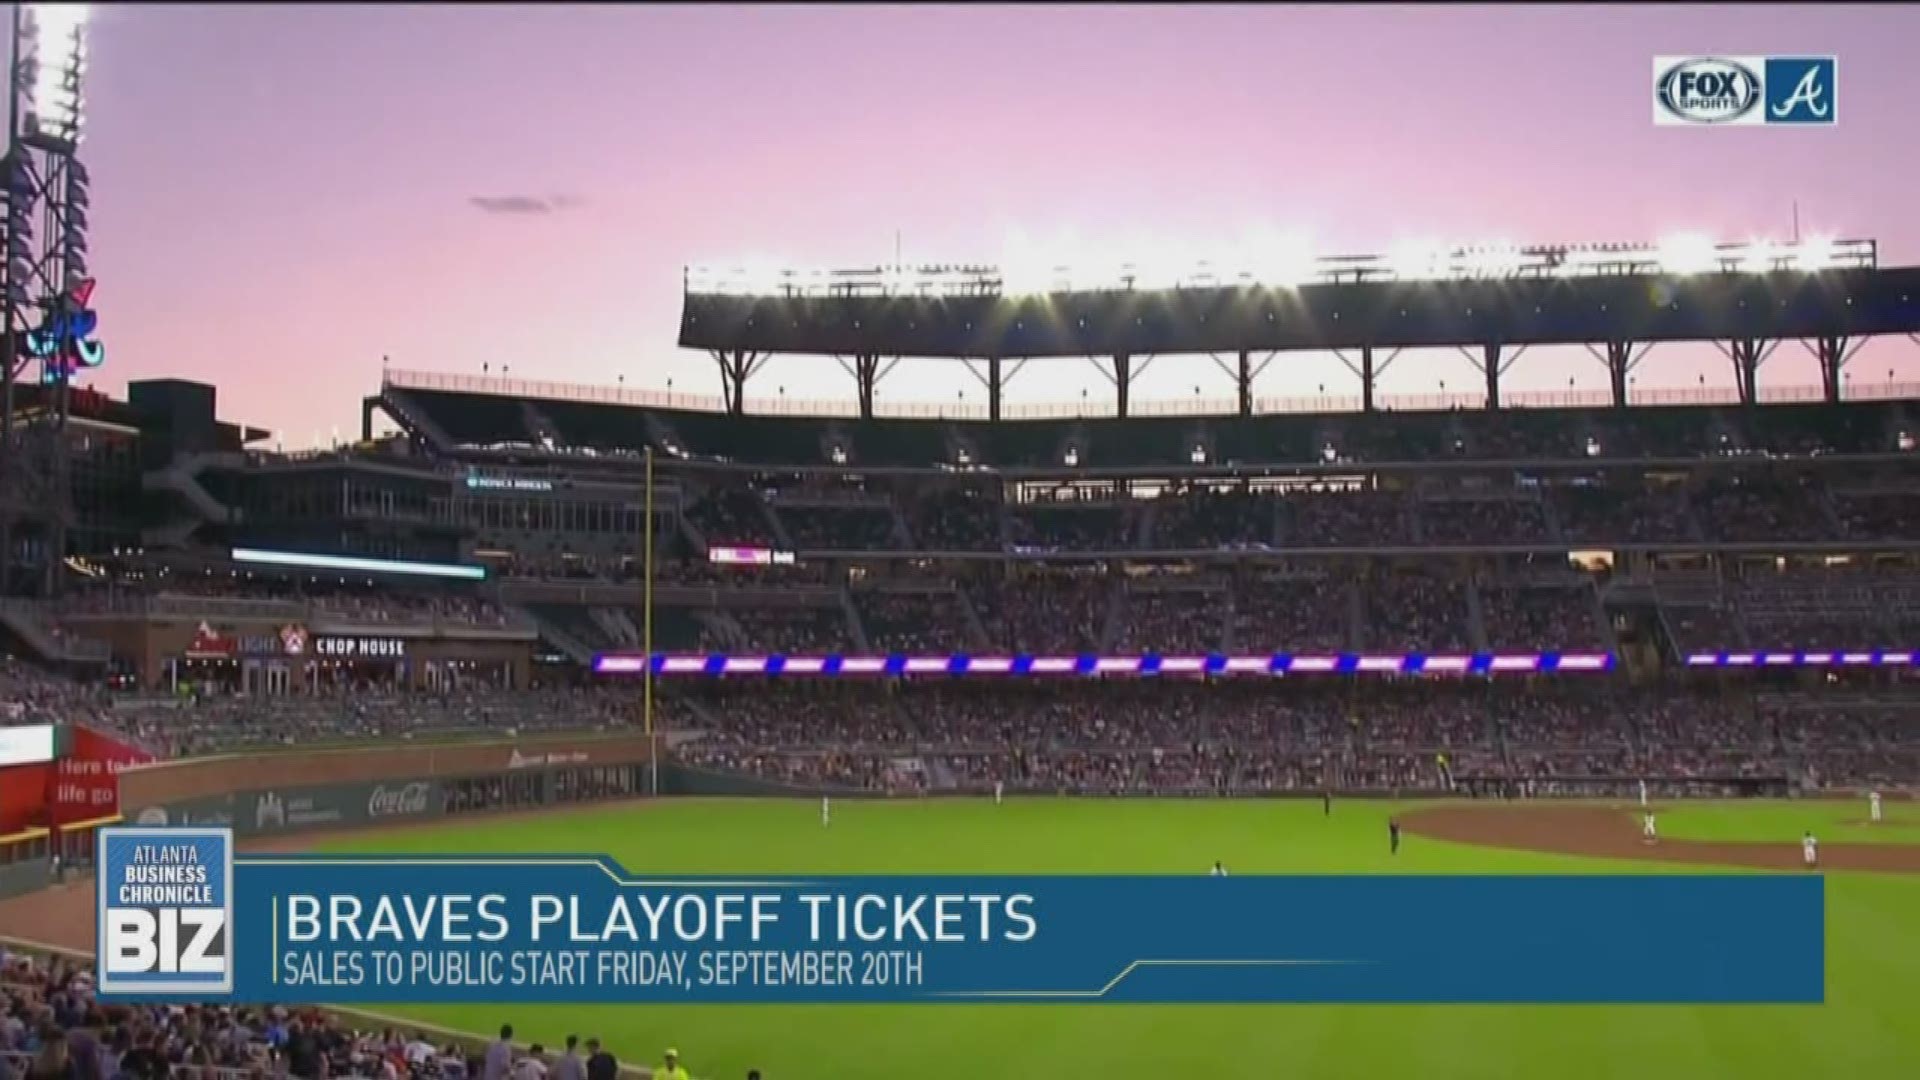 Chop On! Get the Braves playoff ticket scoop on 'Atlanta Business Chronicle's BIZ'